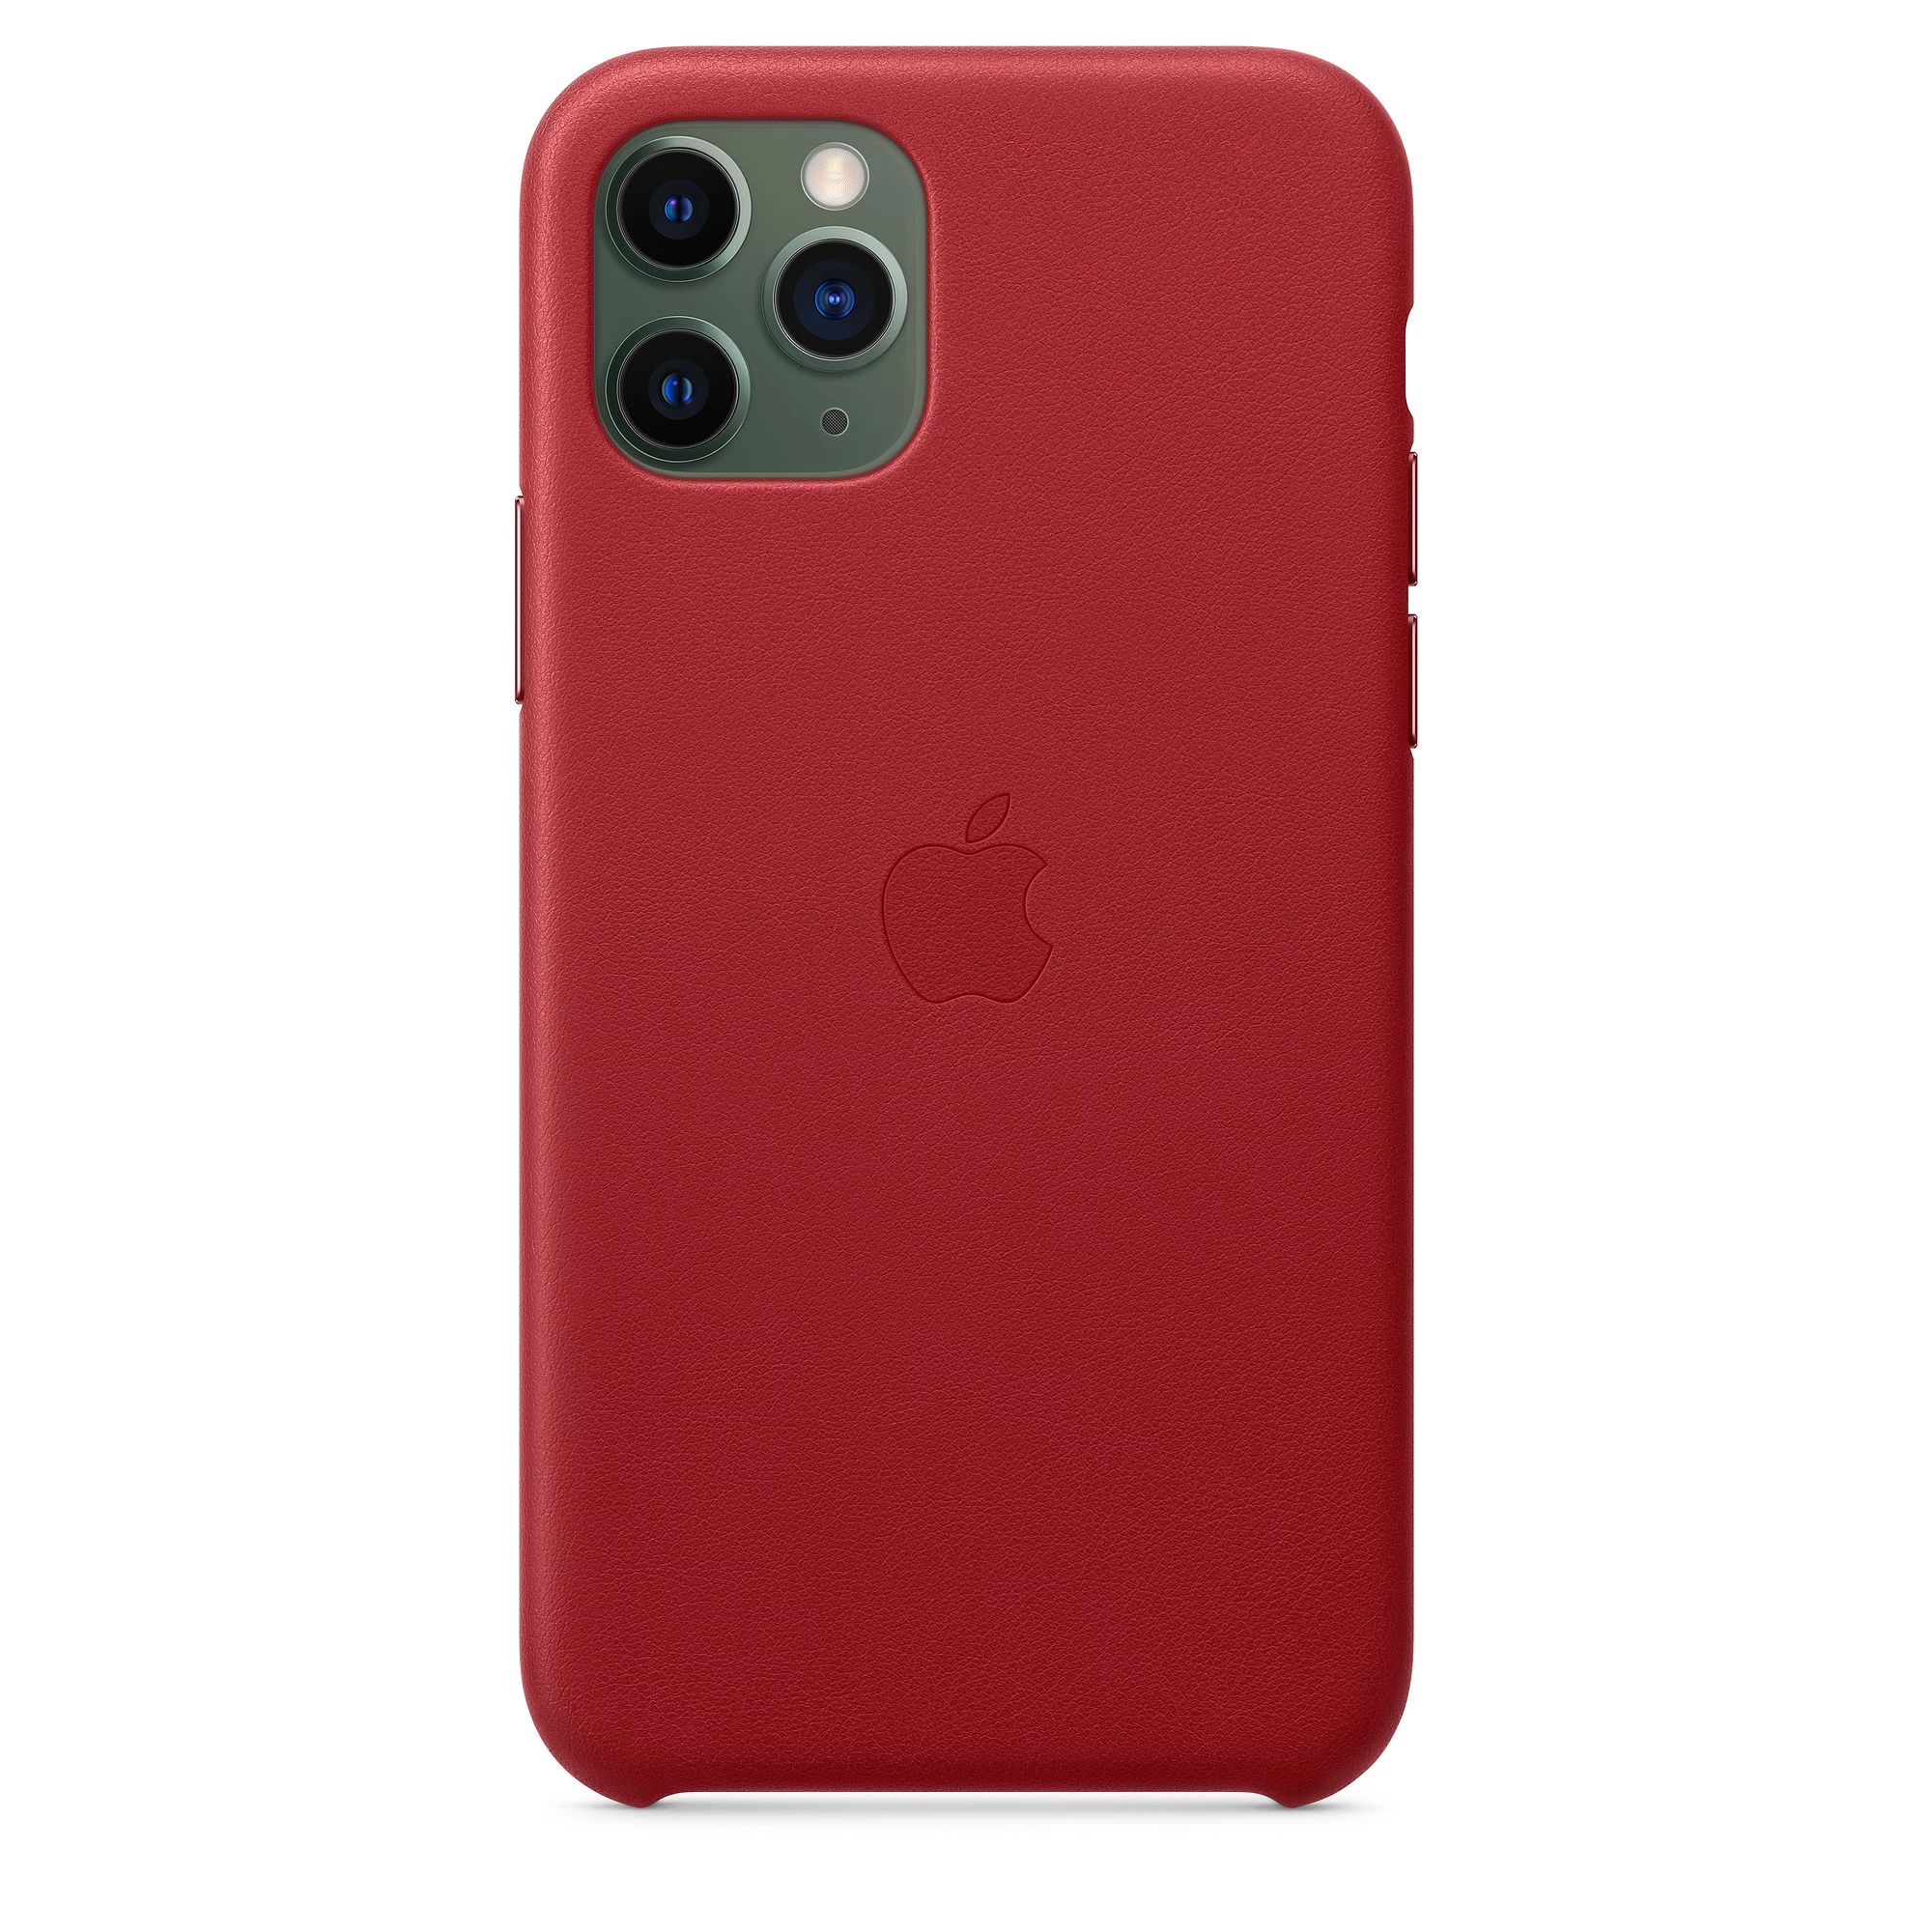 Apple iPhone 11 Pro Leather Case - PRODUCT RED (MWYF2)